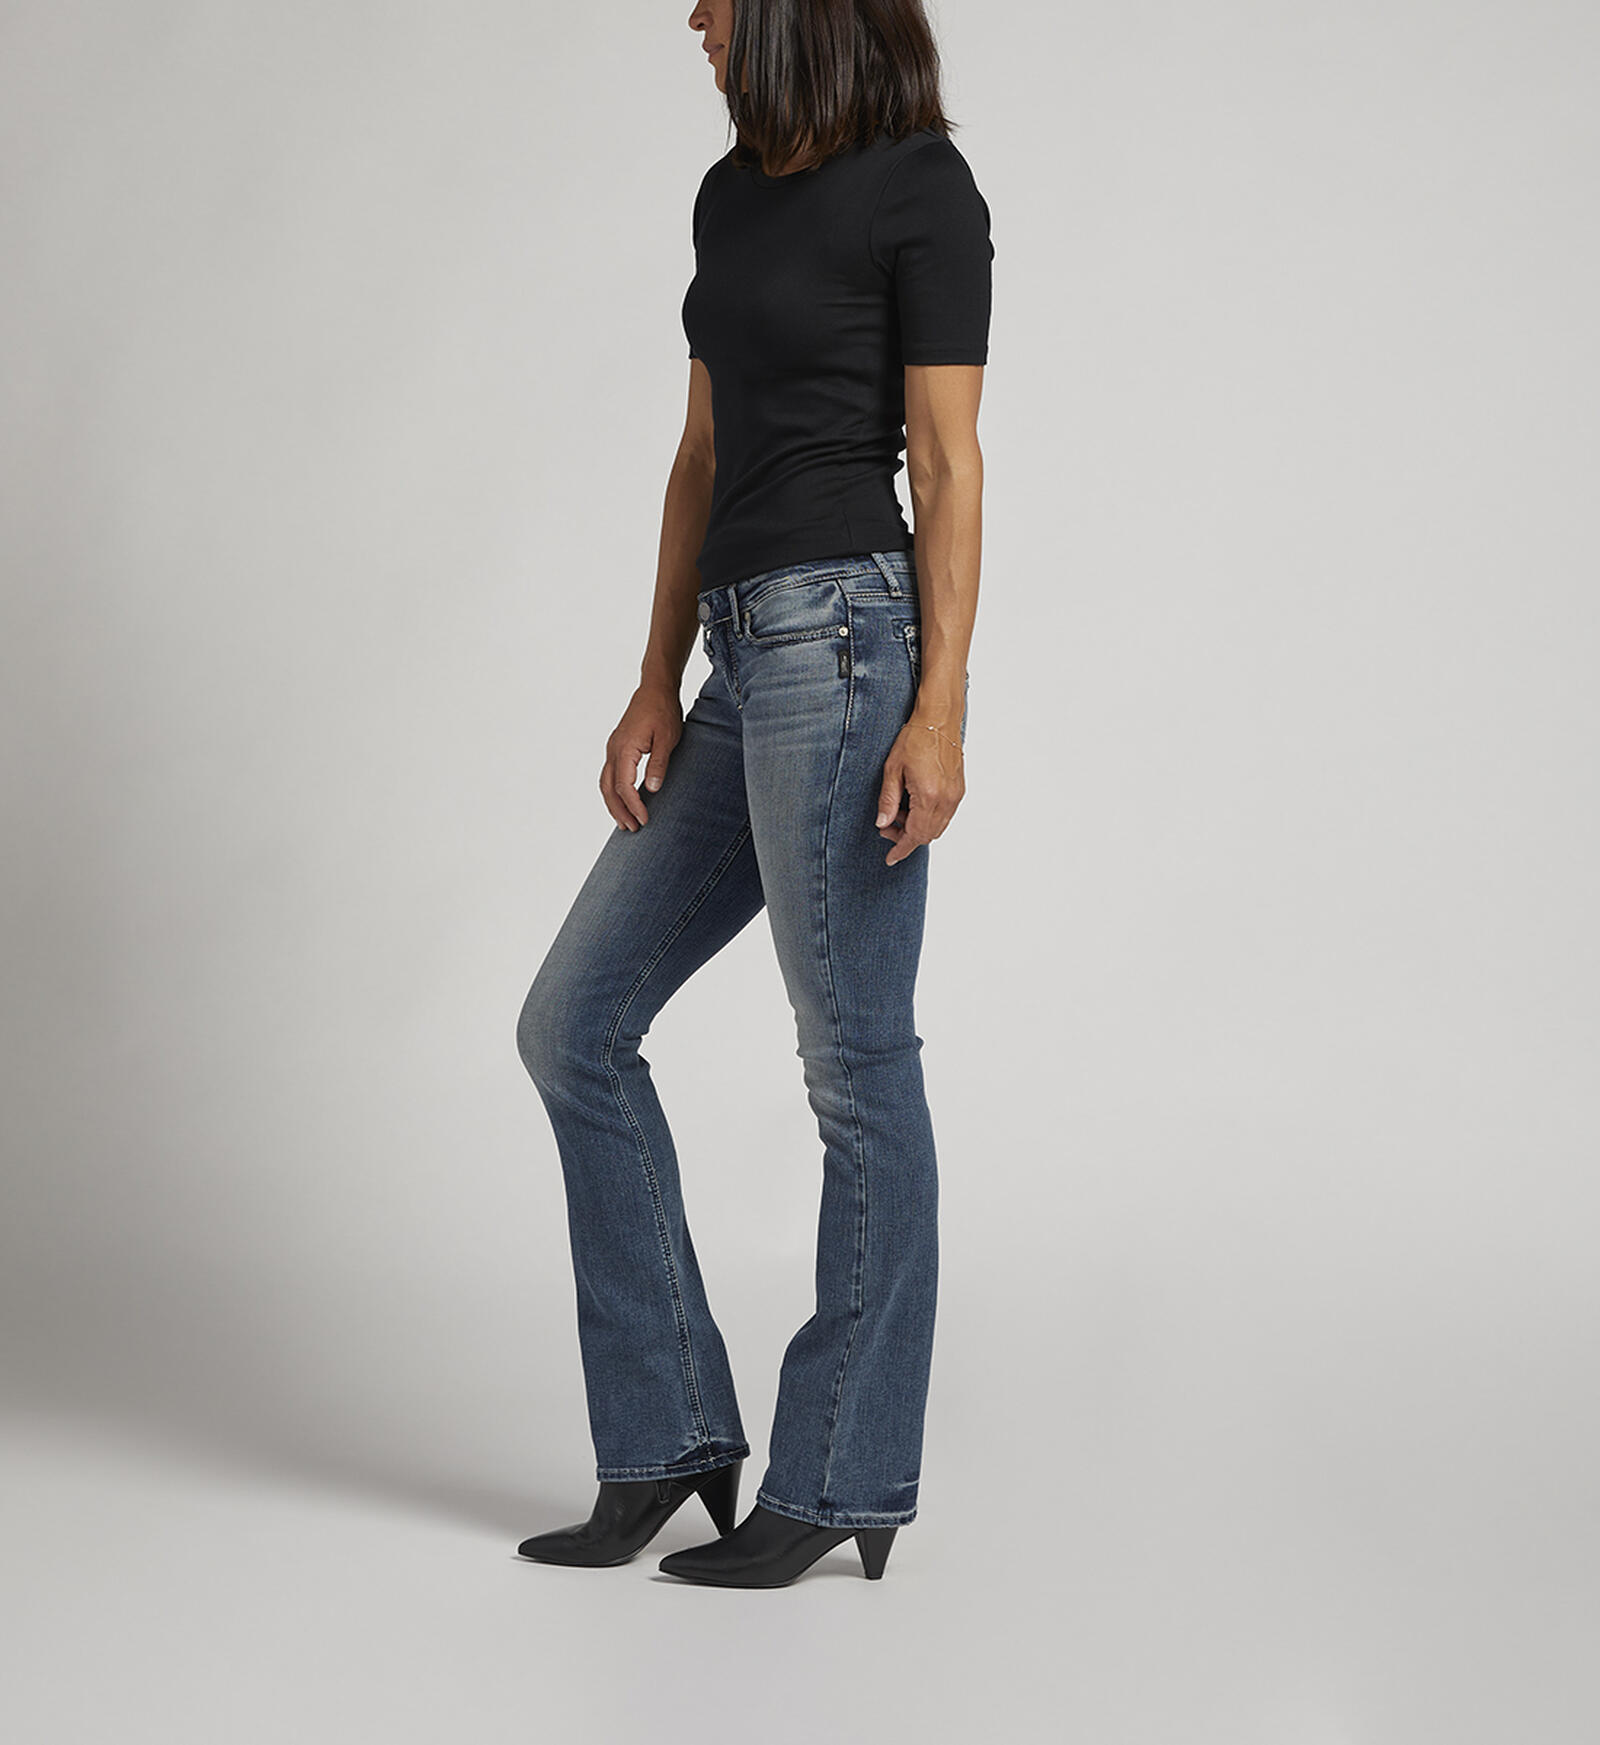 Buy Elyse Mid Rise Slim Bootcut Jeans for CAD 114.00